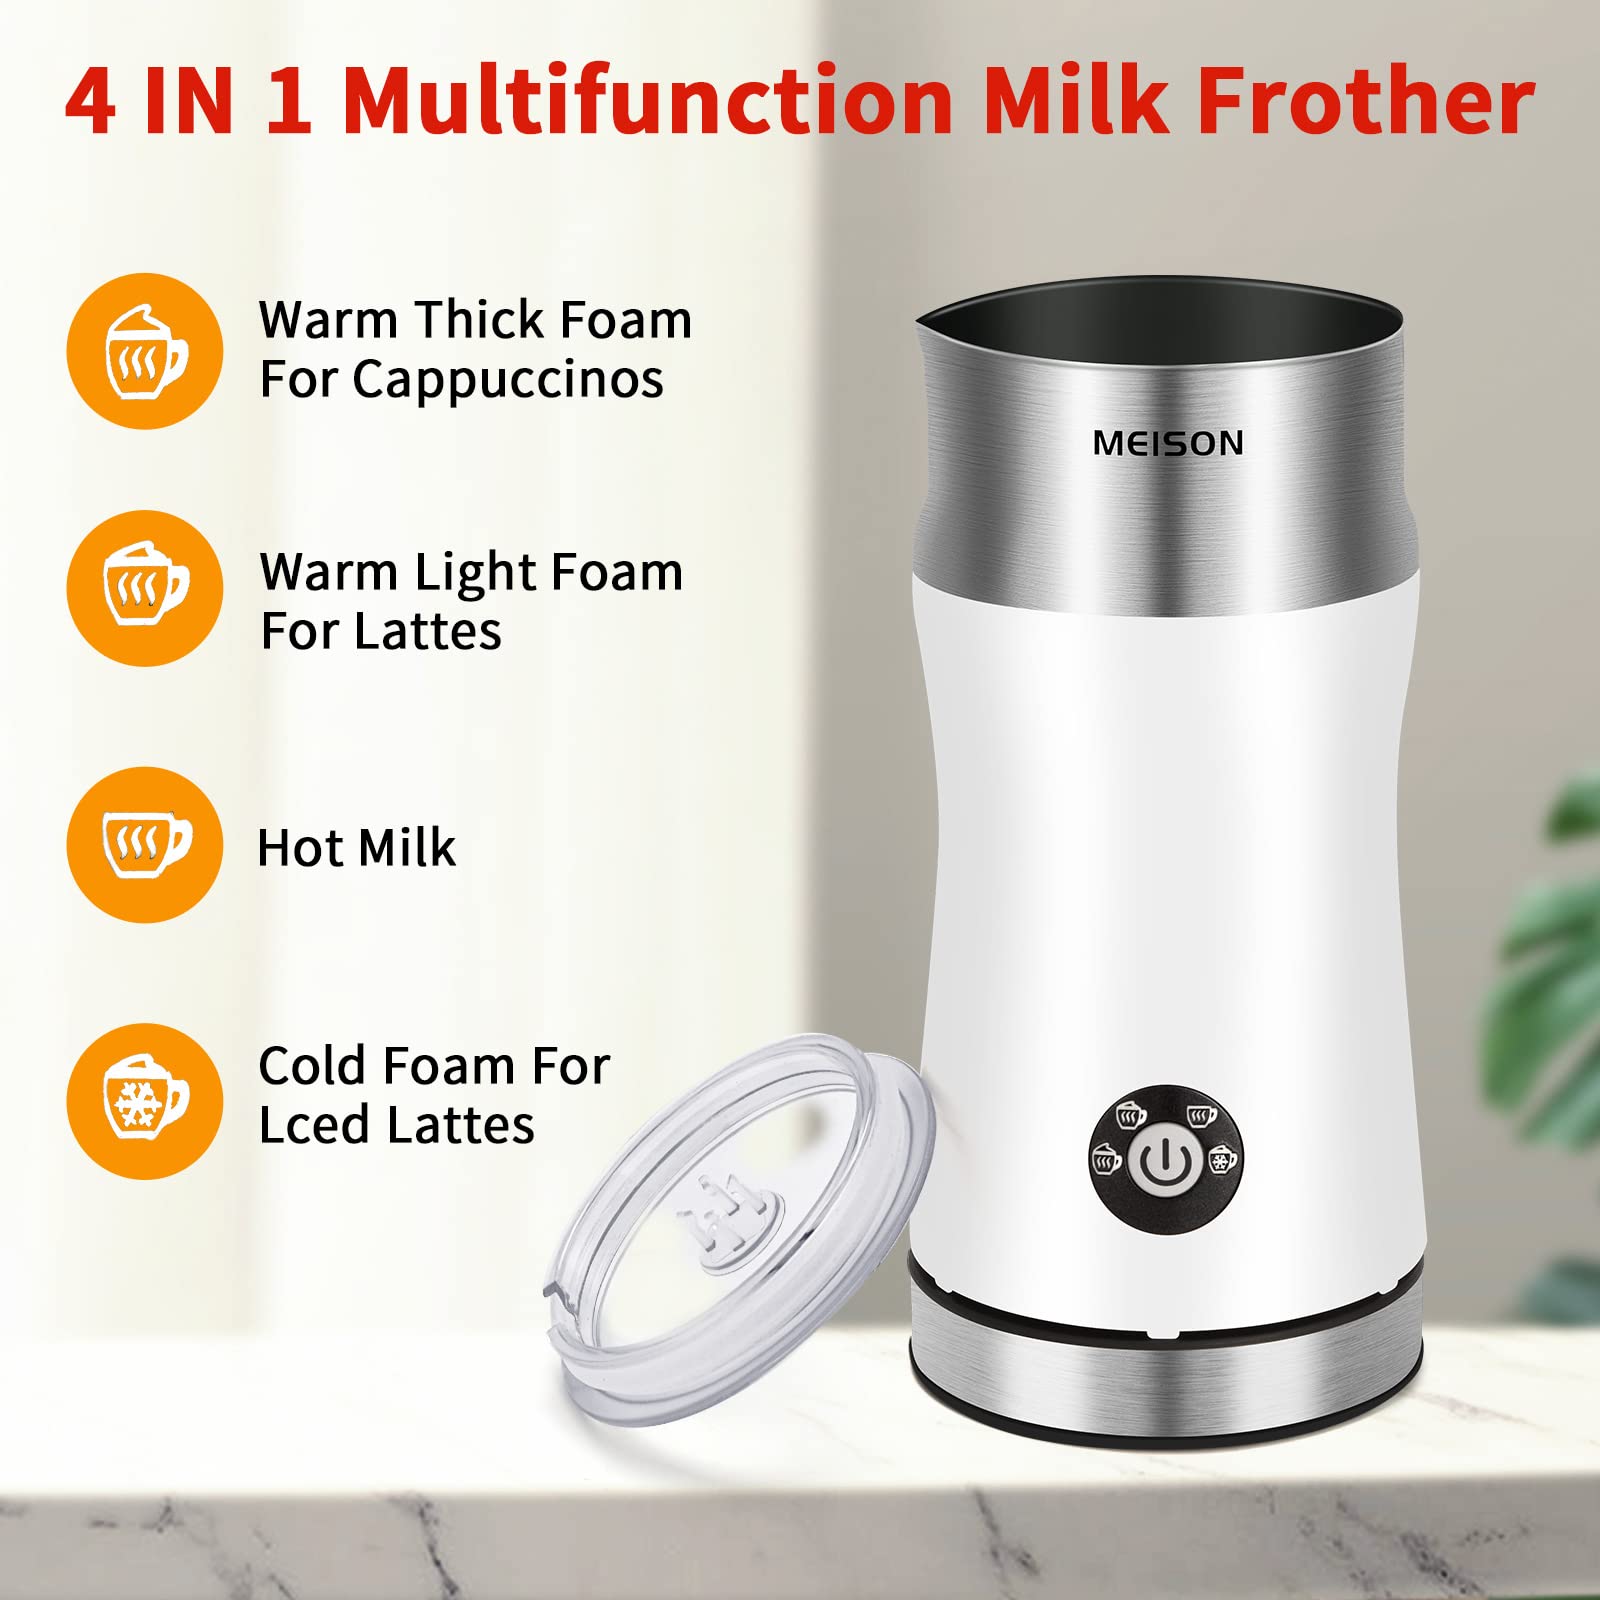 Electric Milk Frother, 4 IN 1 Electric Milk Steamer, Automatic Warm and Cold Milk Foam Maker, 8.4oz/250ml, Stainless Steel Milk Warmer for Latte, Cappuccinos, Macchiato, Hot Chocolate Milk